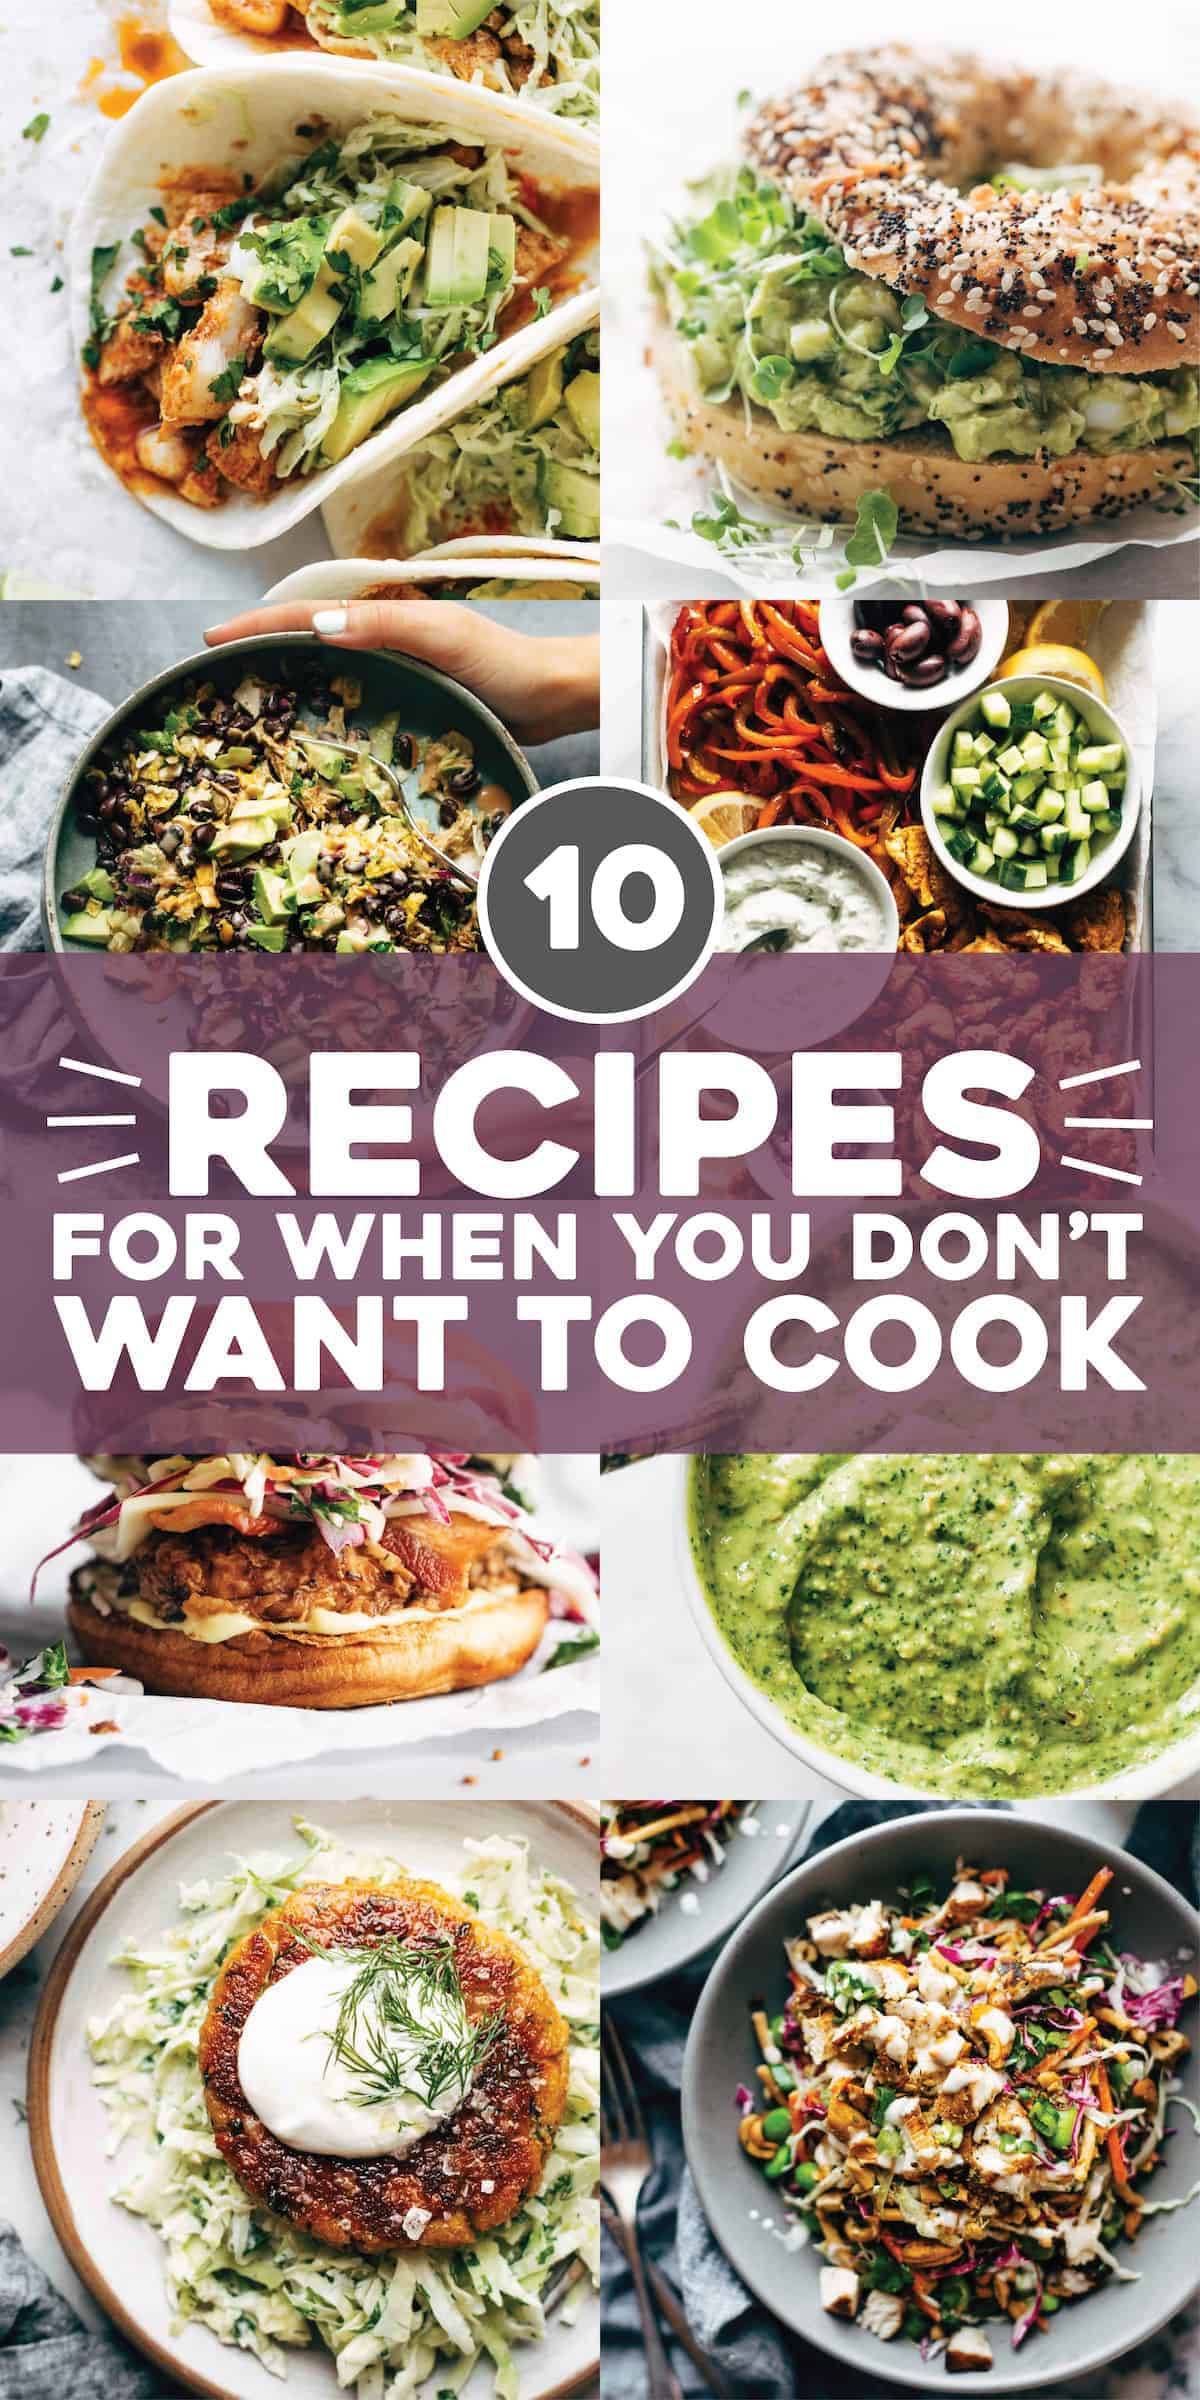 10 Recipes for When You Don't Want to Cook.